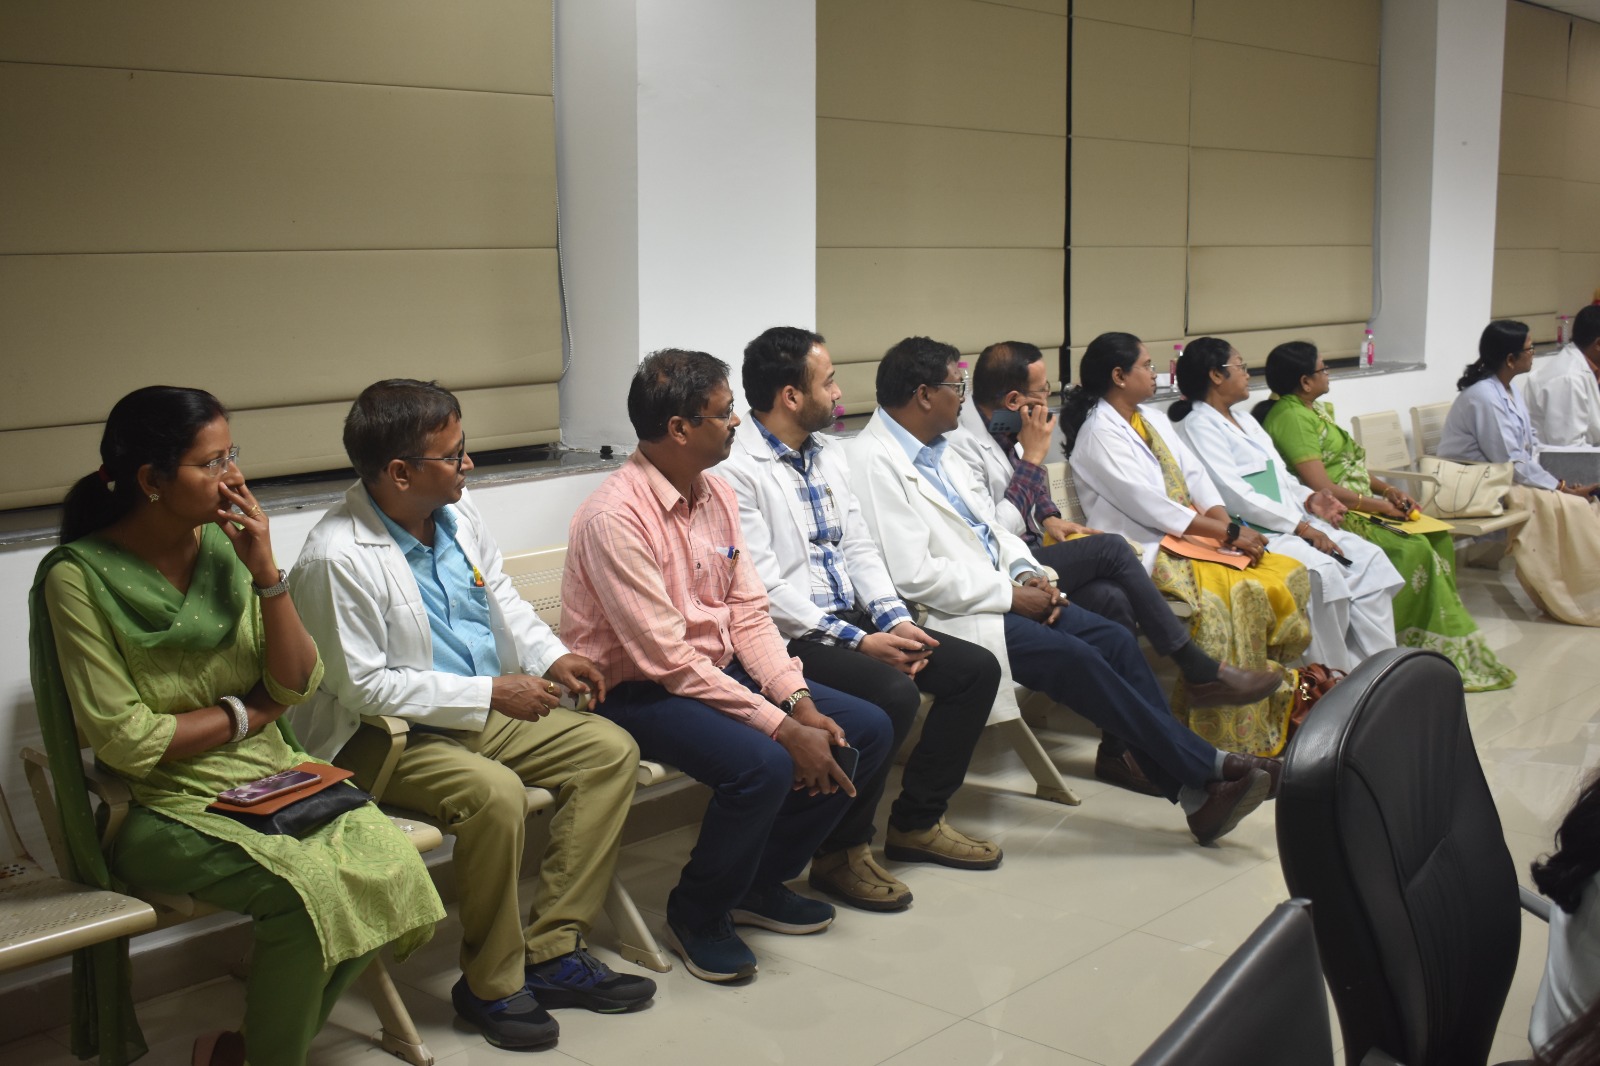 Topic : Interaction of Shri L. Khiangte , Chief secretary (Government of Jharkhand) and Shri Ajoy Kumar Singh (Principal Secretary, Ministry of Health, Medical Education and Family Welcome, Government of Jharkhand) with RIMS Administration and All Head of Department,RIMS